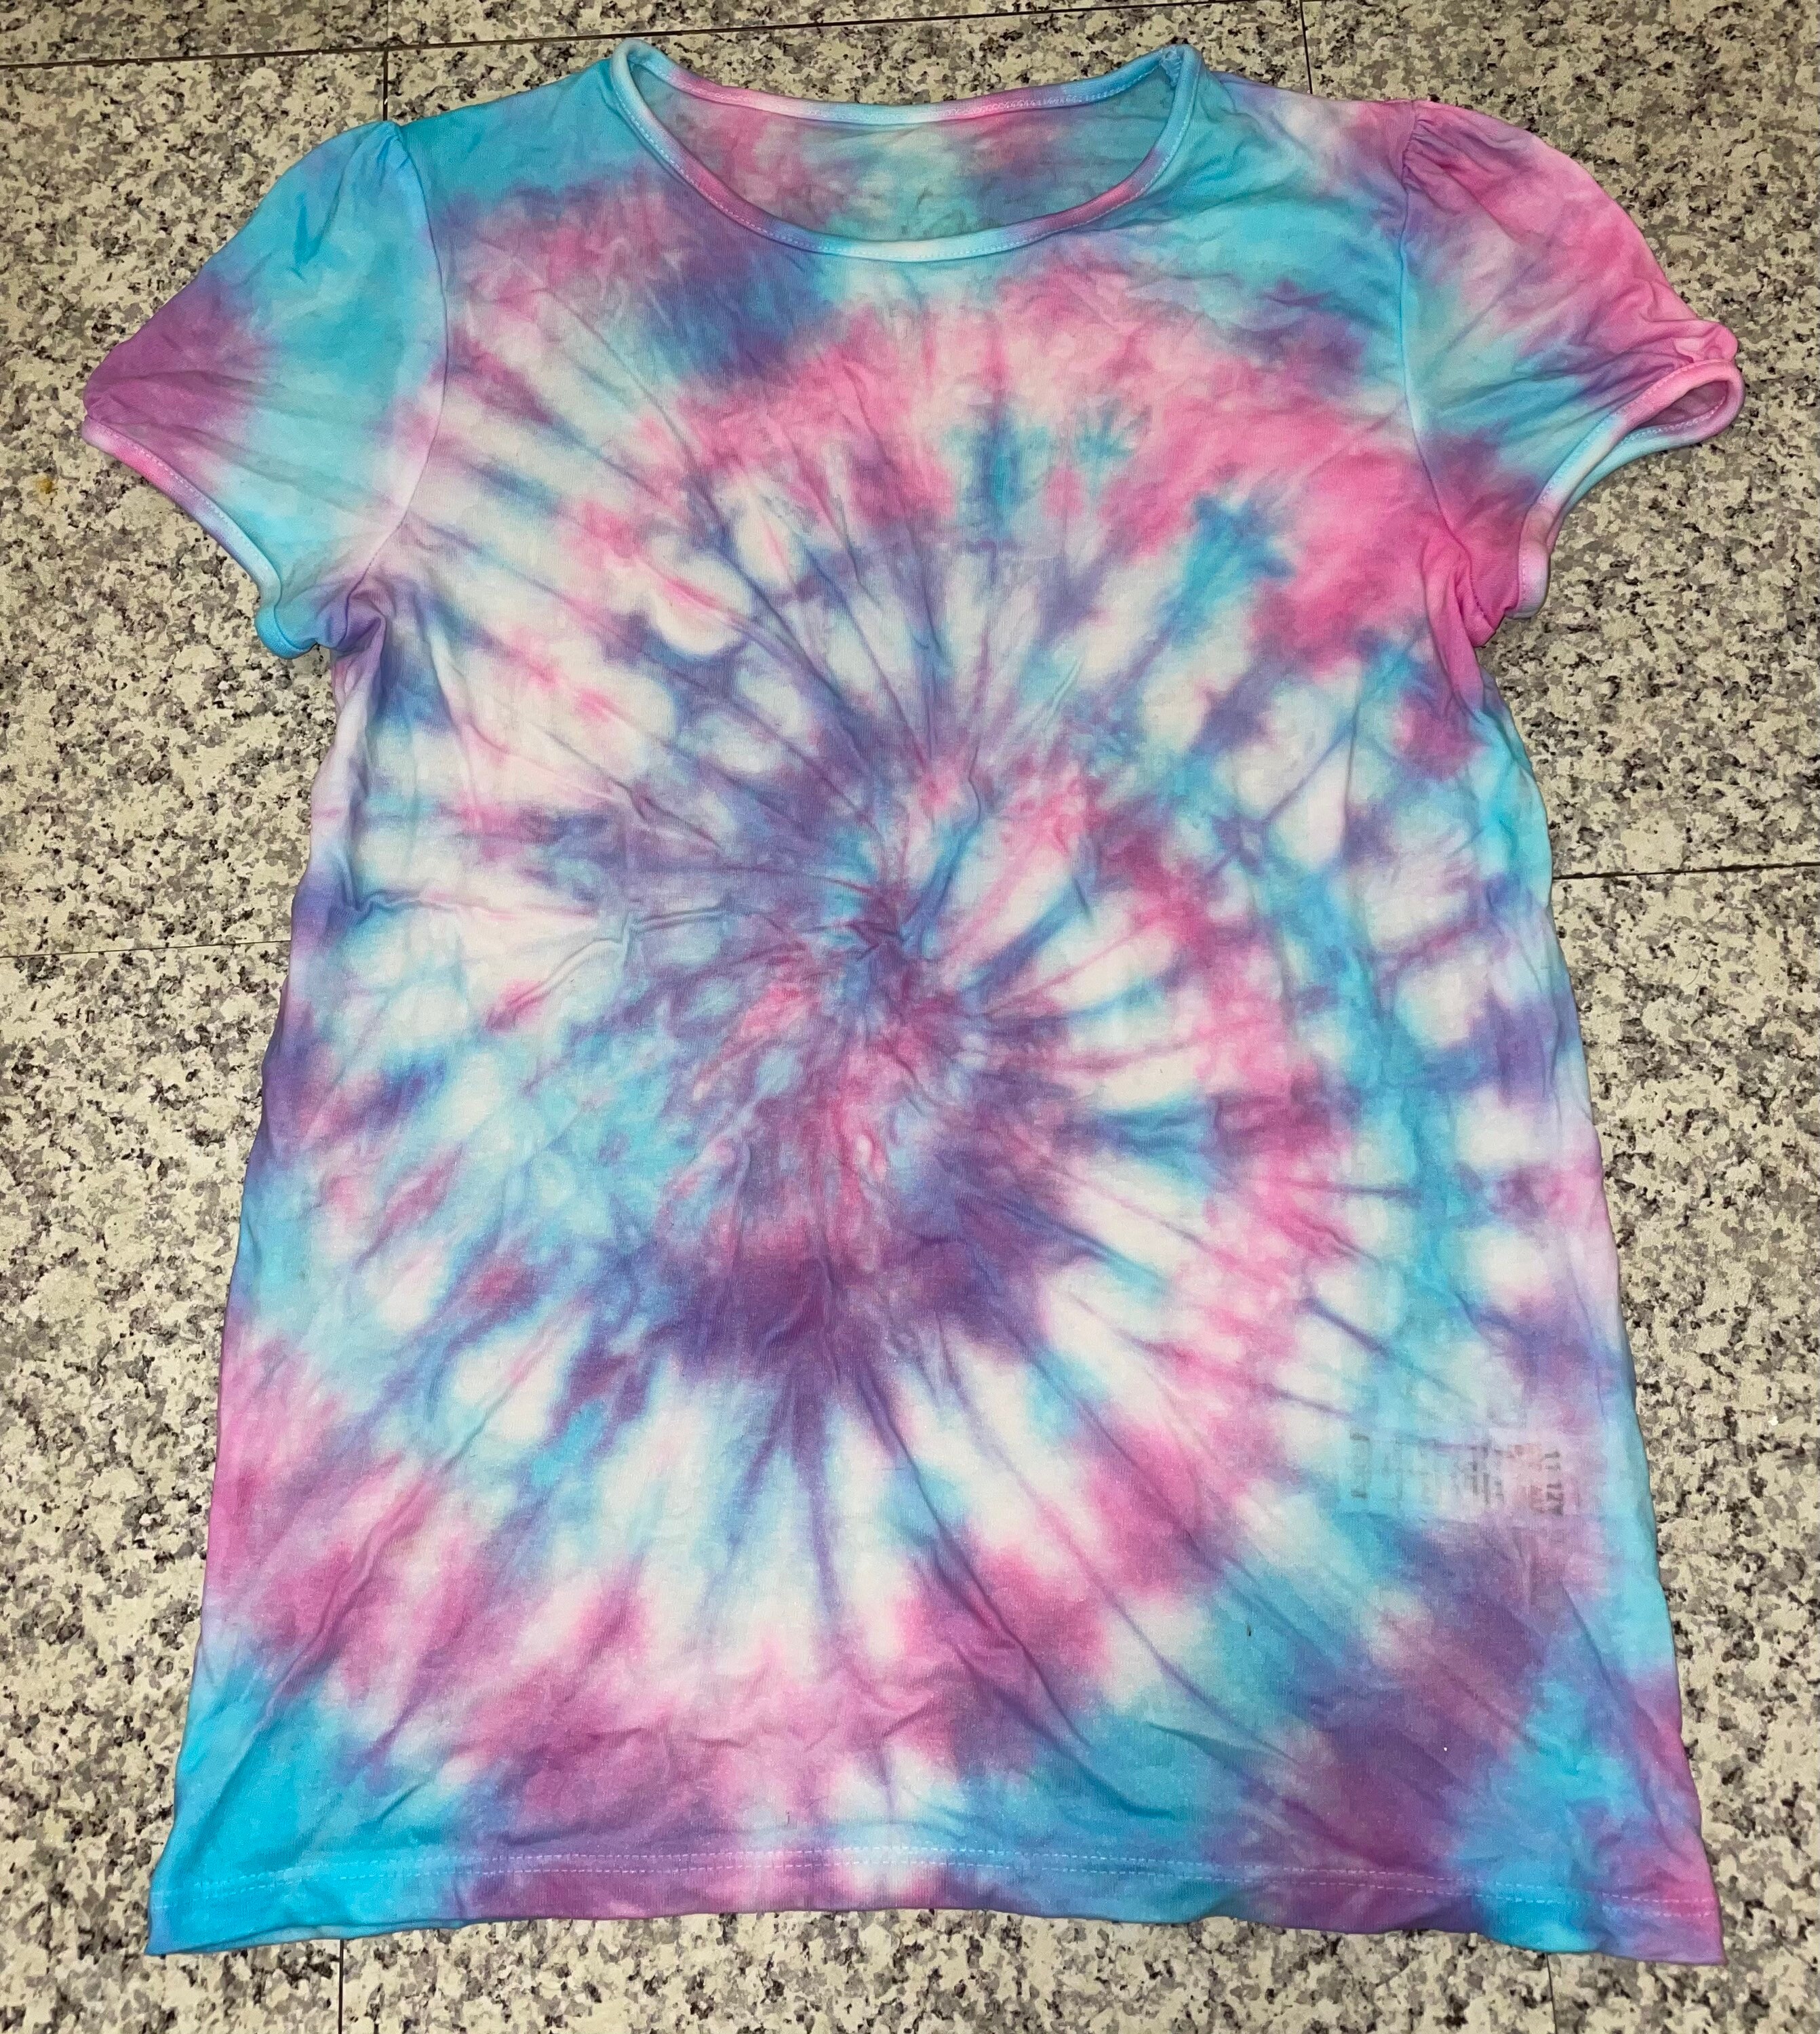 Childrens tie-dye t-shirt blue purple and pink size 11-12 | Etsy